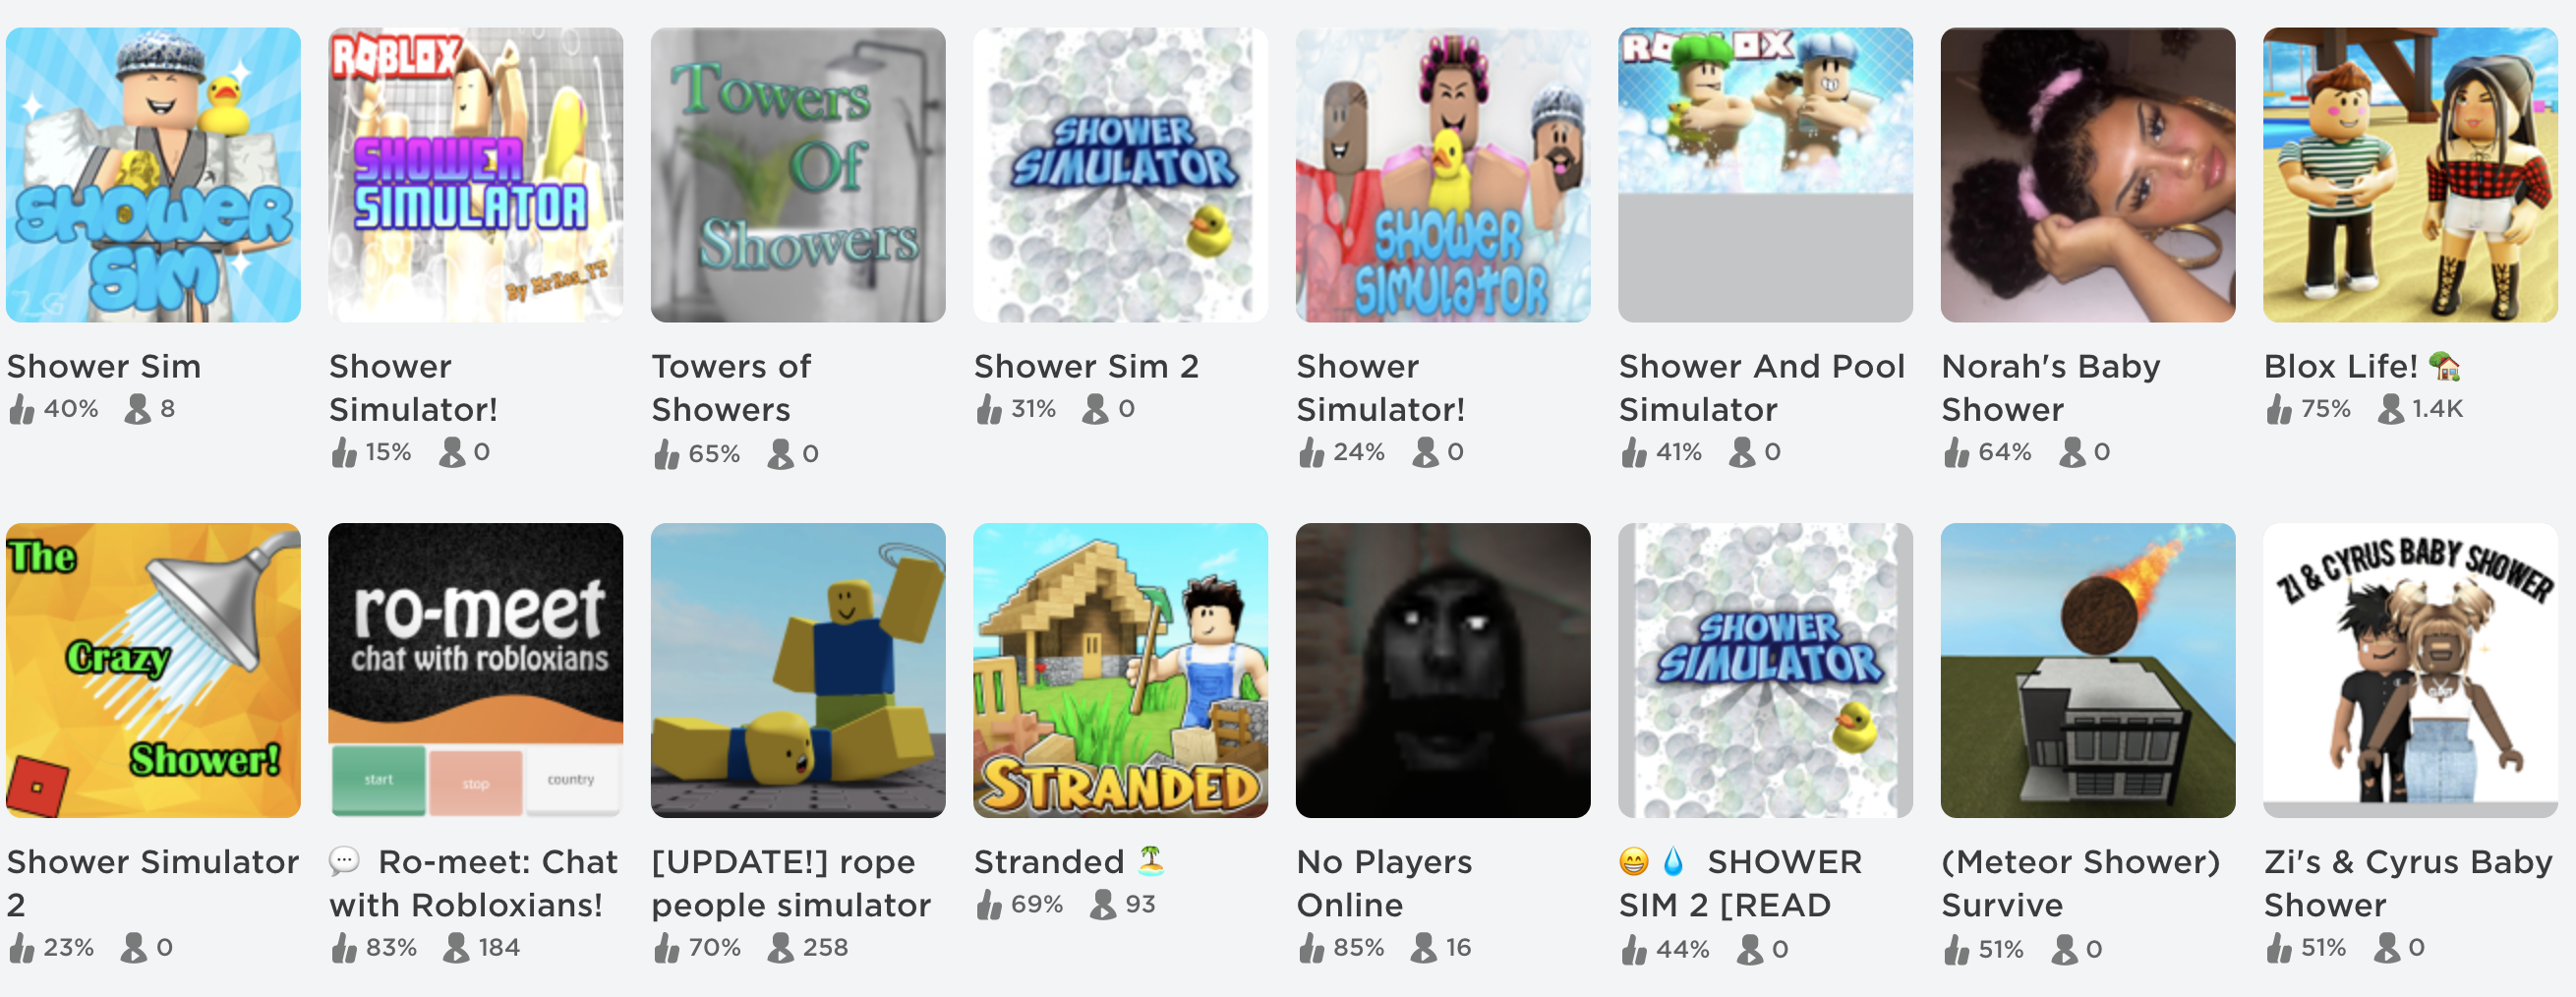 Roblox To Develop Improved Parental Controls As It Struggles With Sexually Explicit Content - how to search for people on roblox